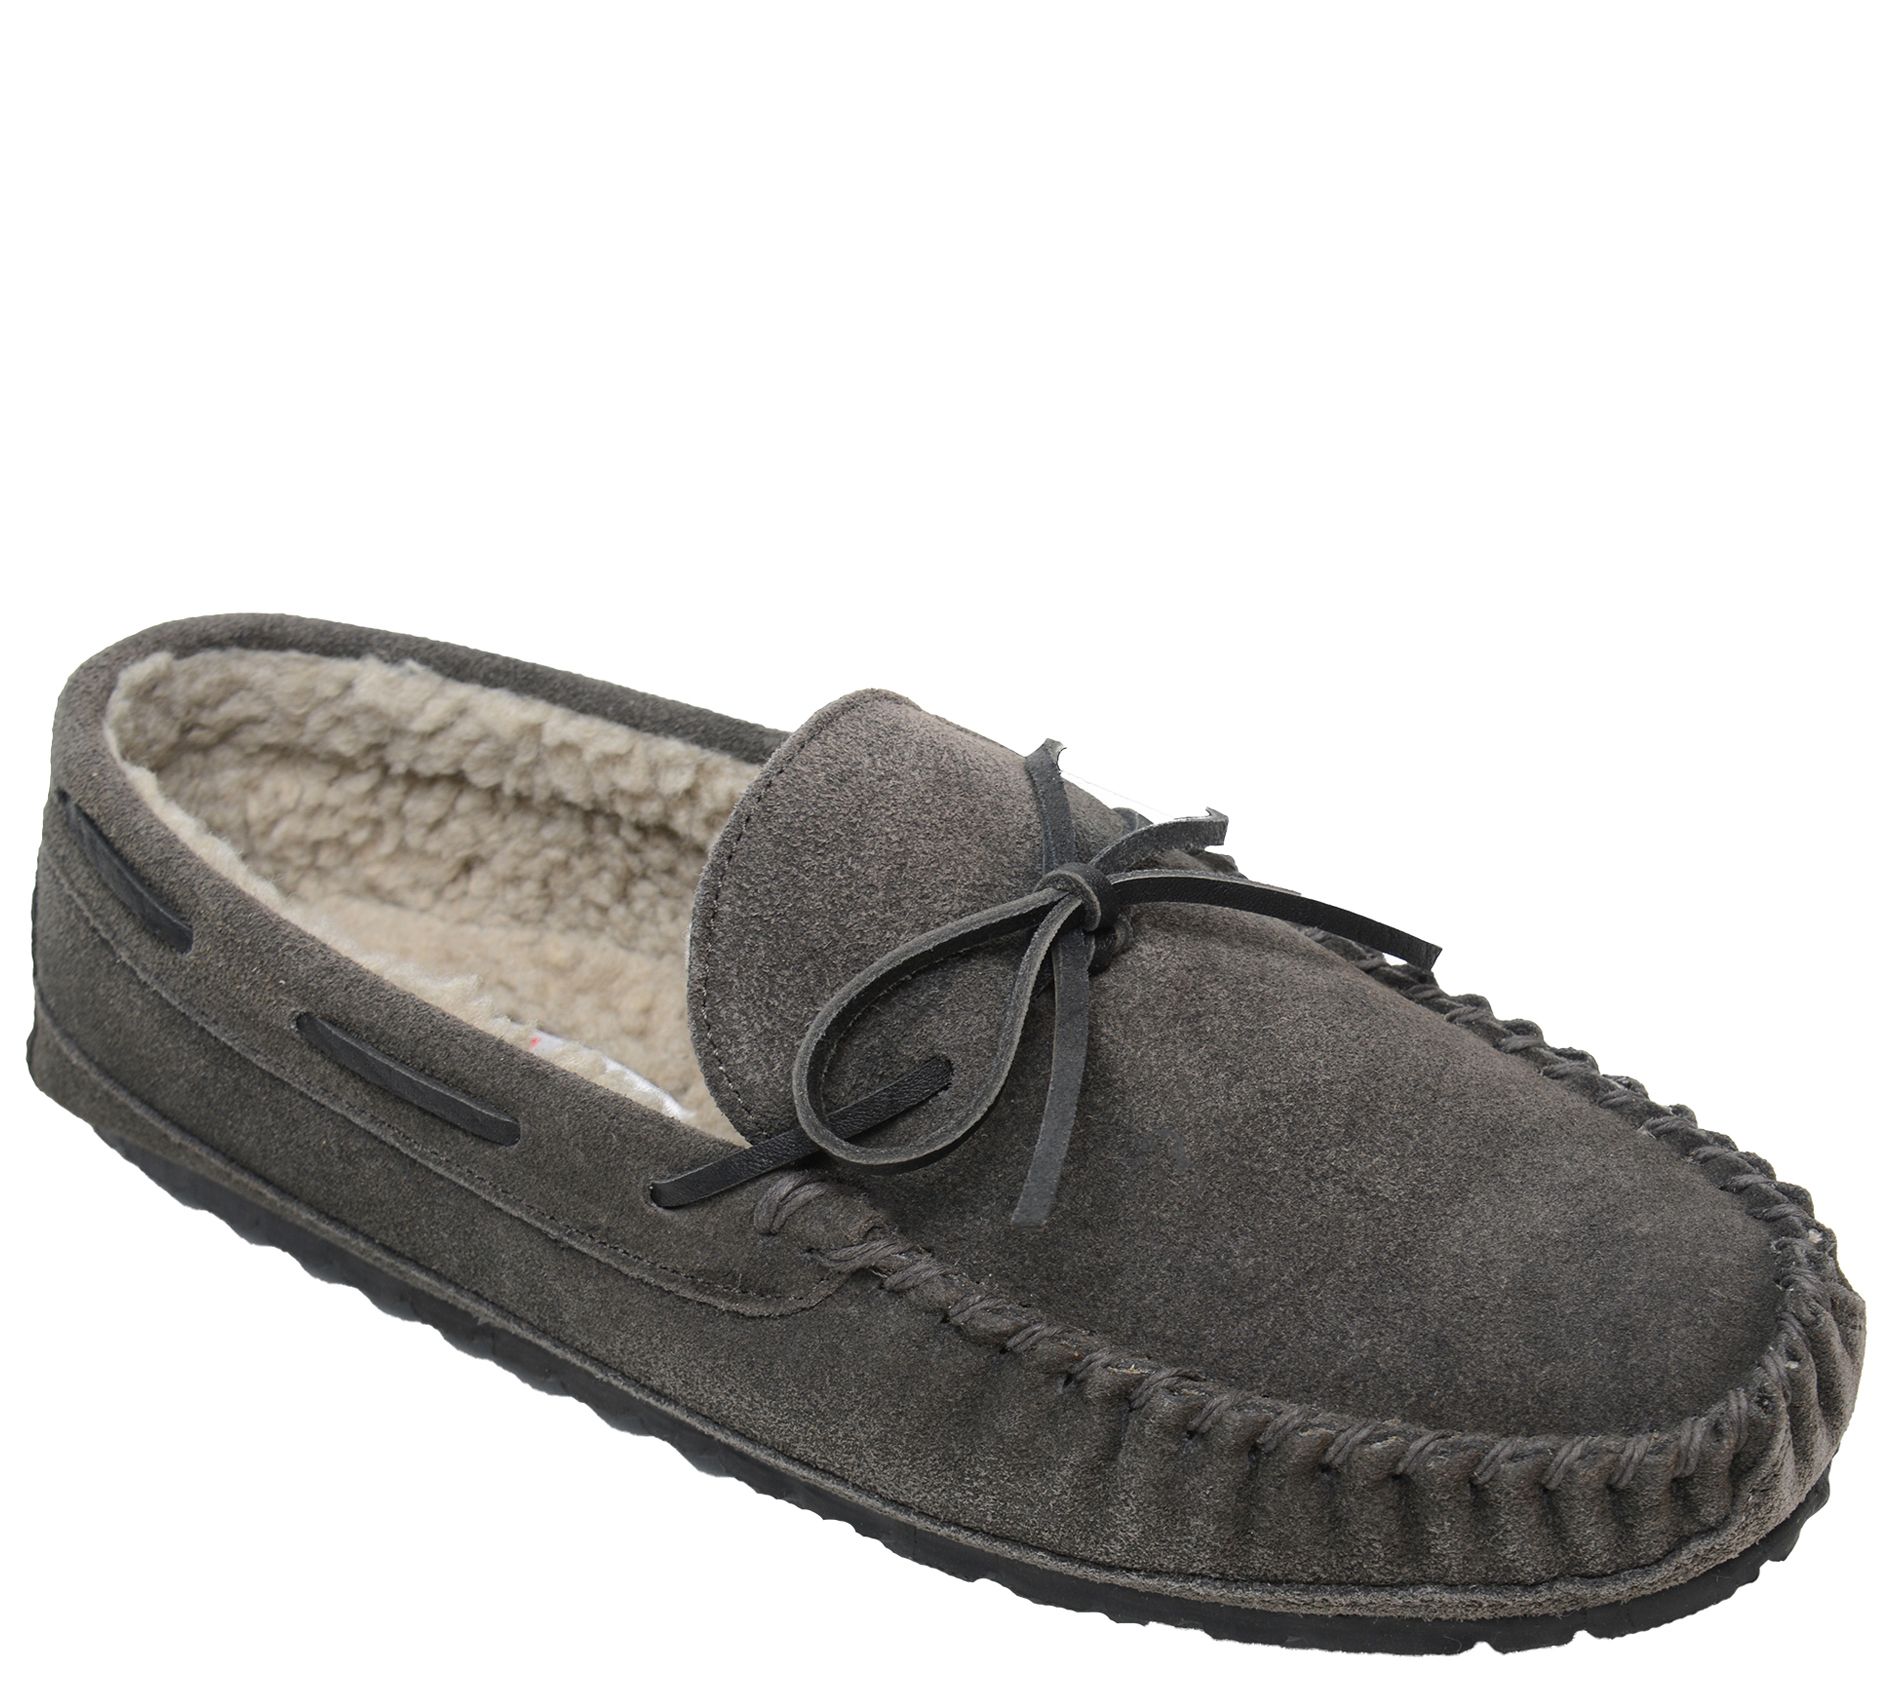 mens grey moccasin slippers